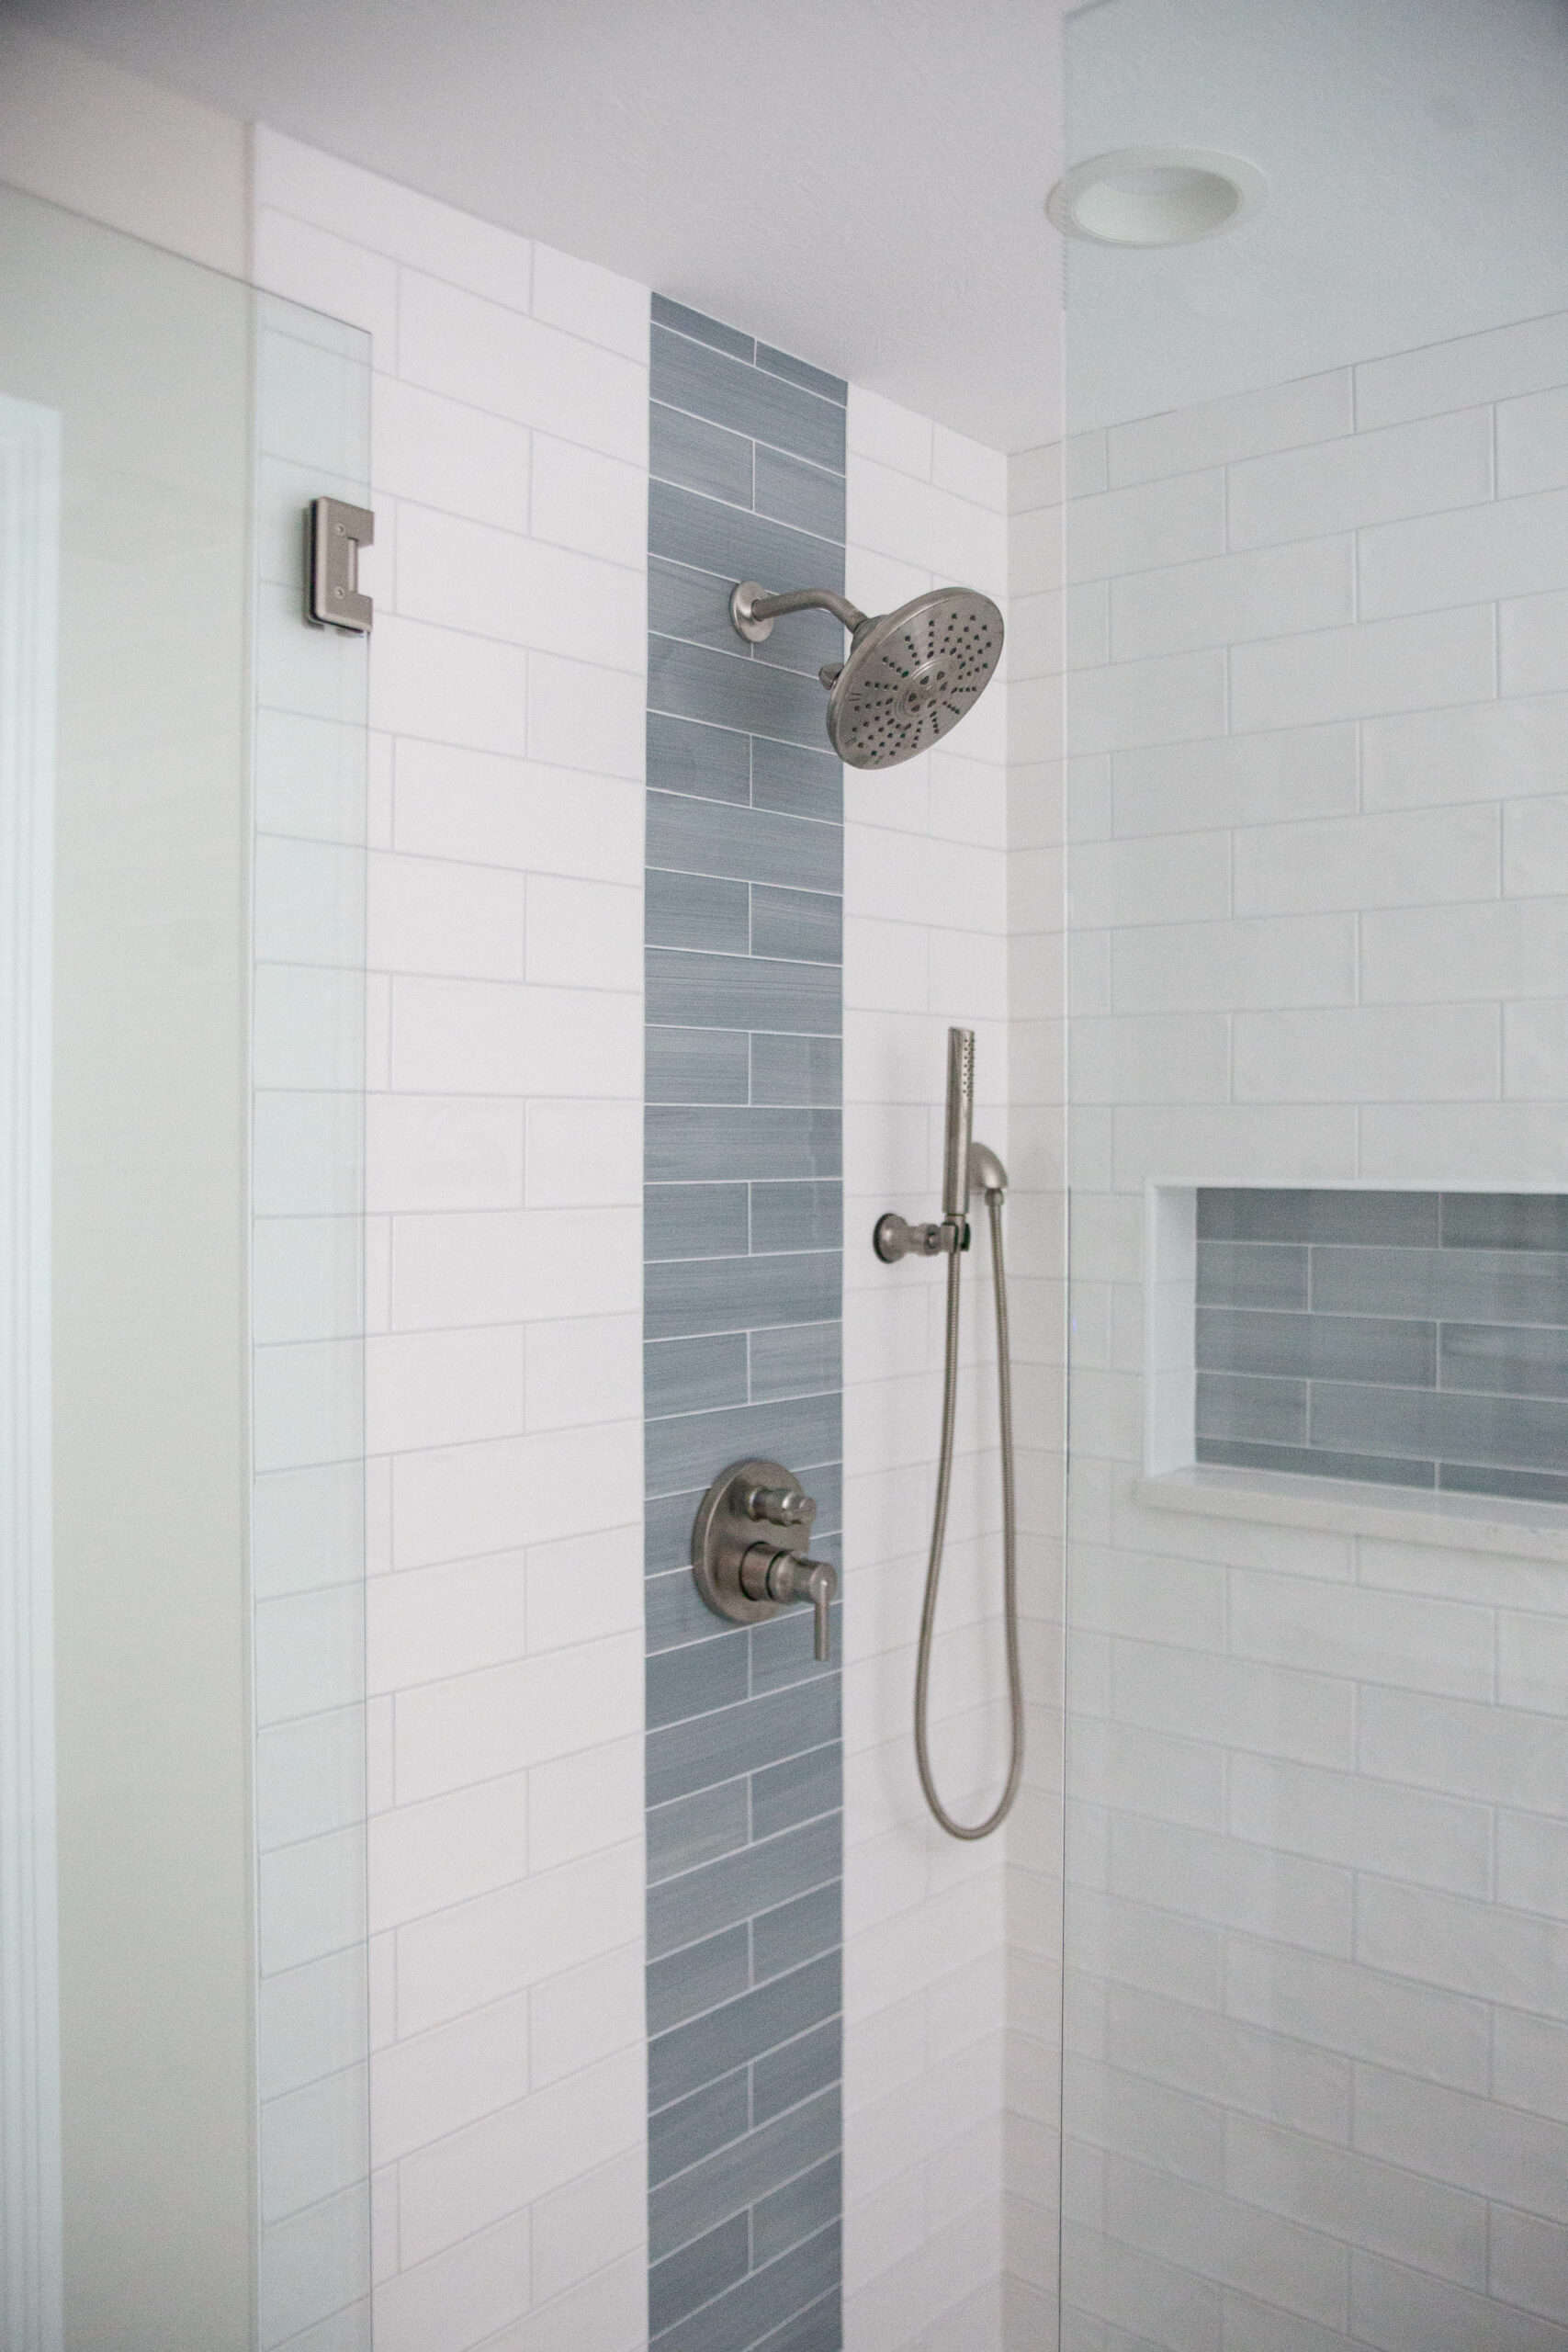 Nicholas Design Build | A blue and white tiled shower with a glass shower head.